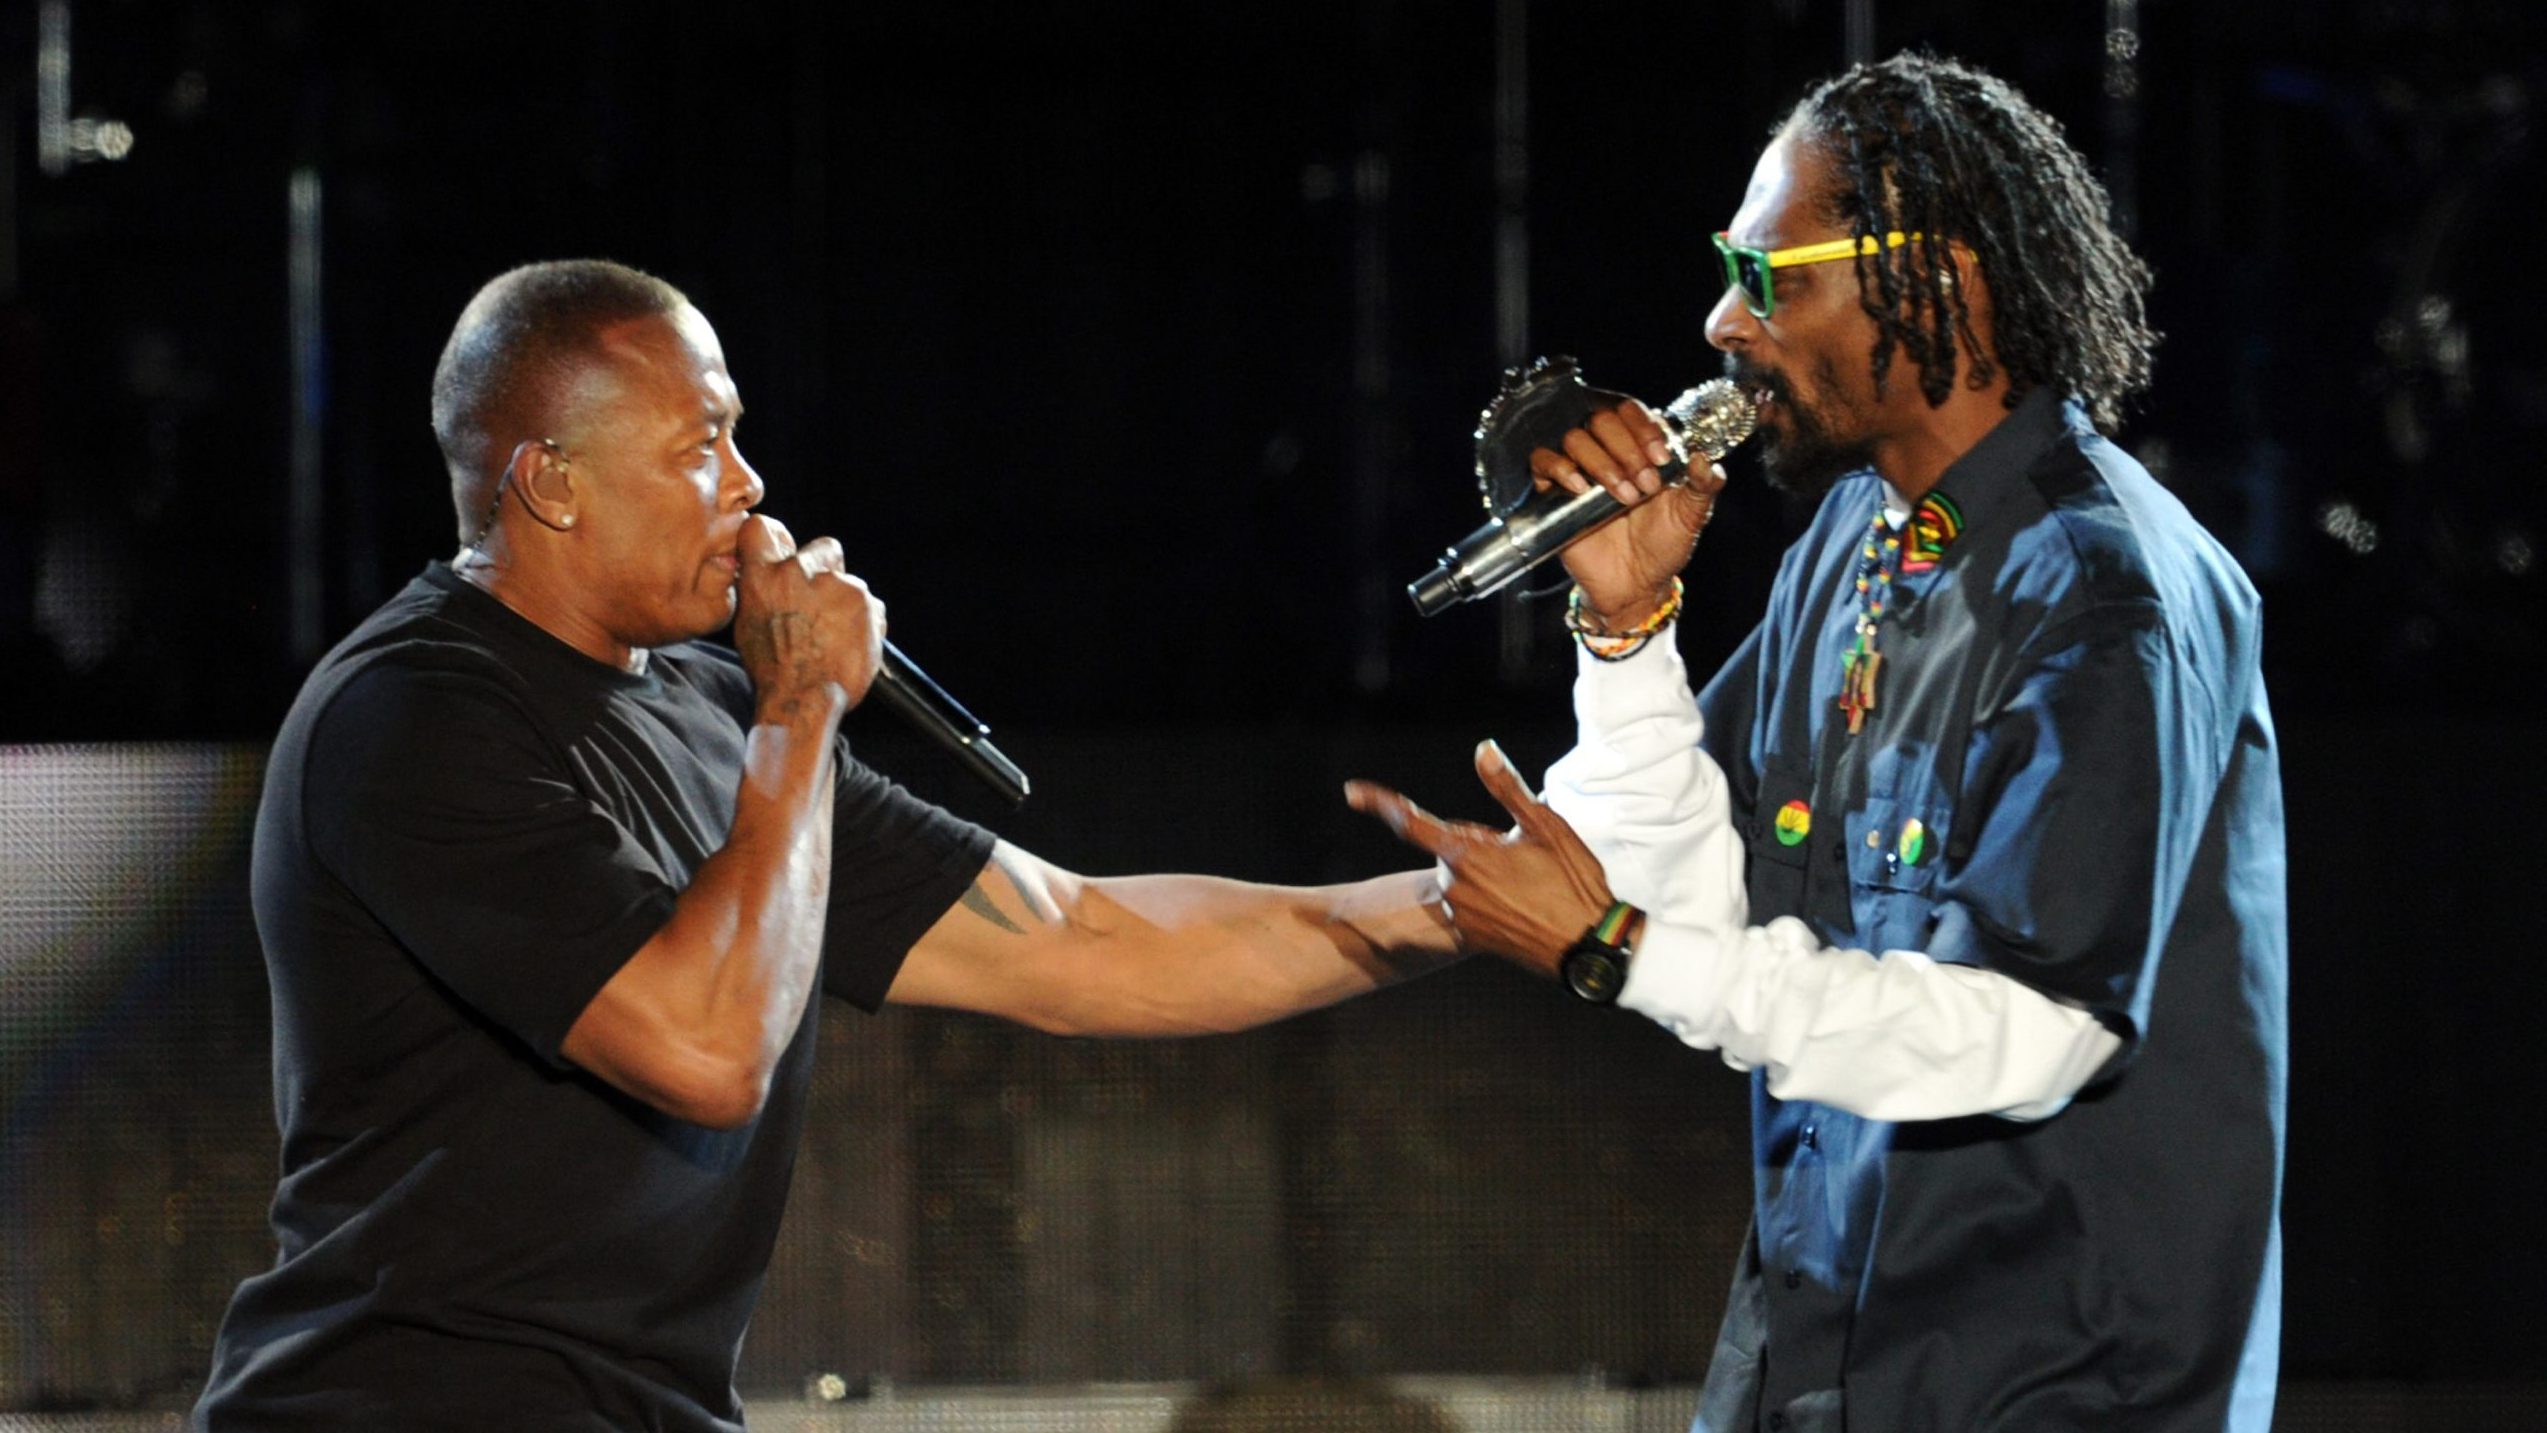 Rappers Dr. Dre (L) and Snoop Dogg perform onstage during day 3 of the 2012 Coachella Valley Music ...